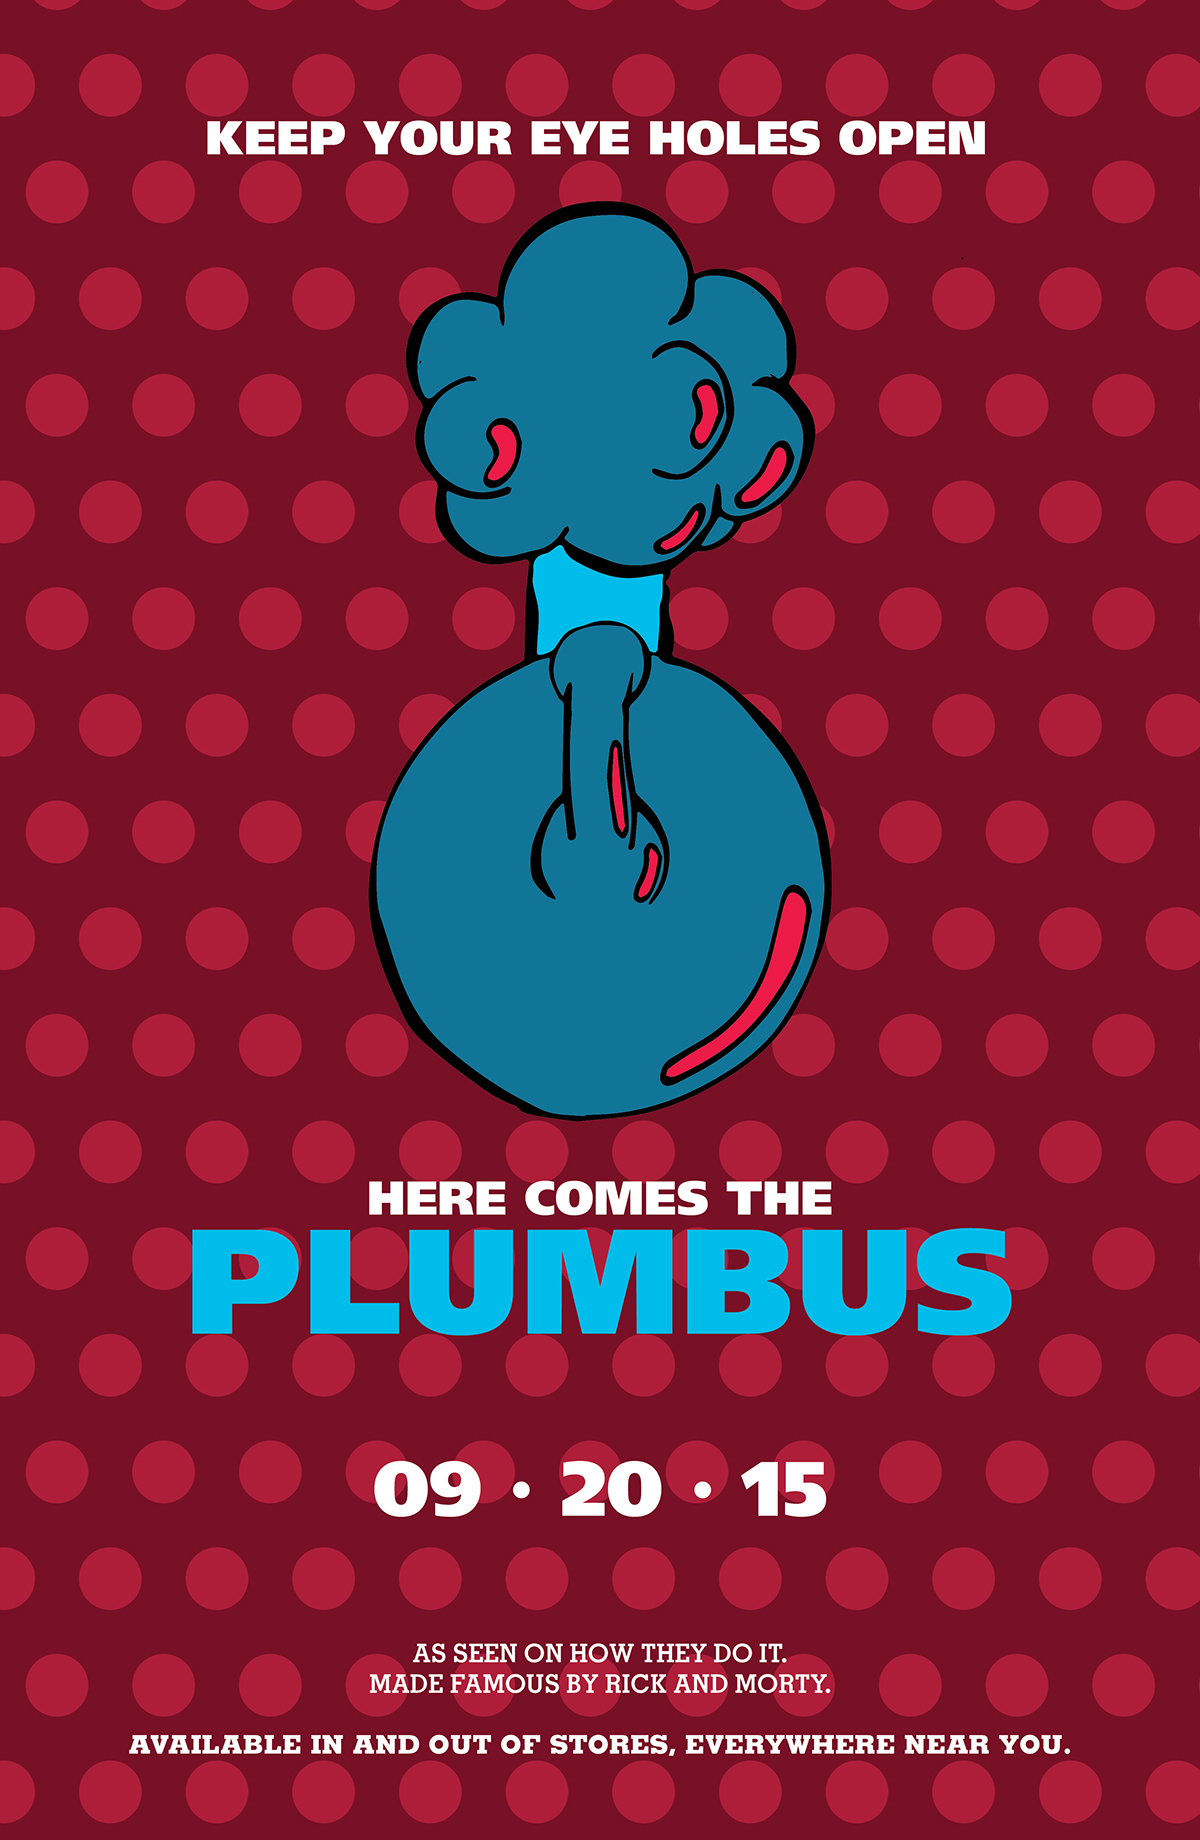 Plumbus Product Launch Posters on Behance